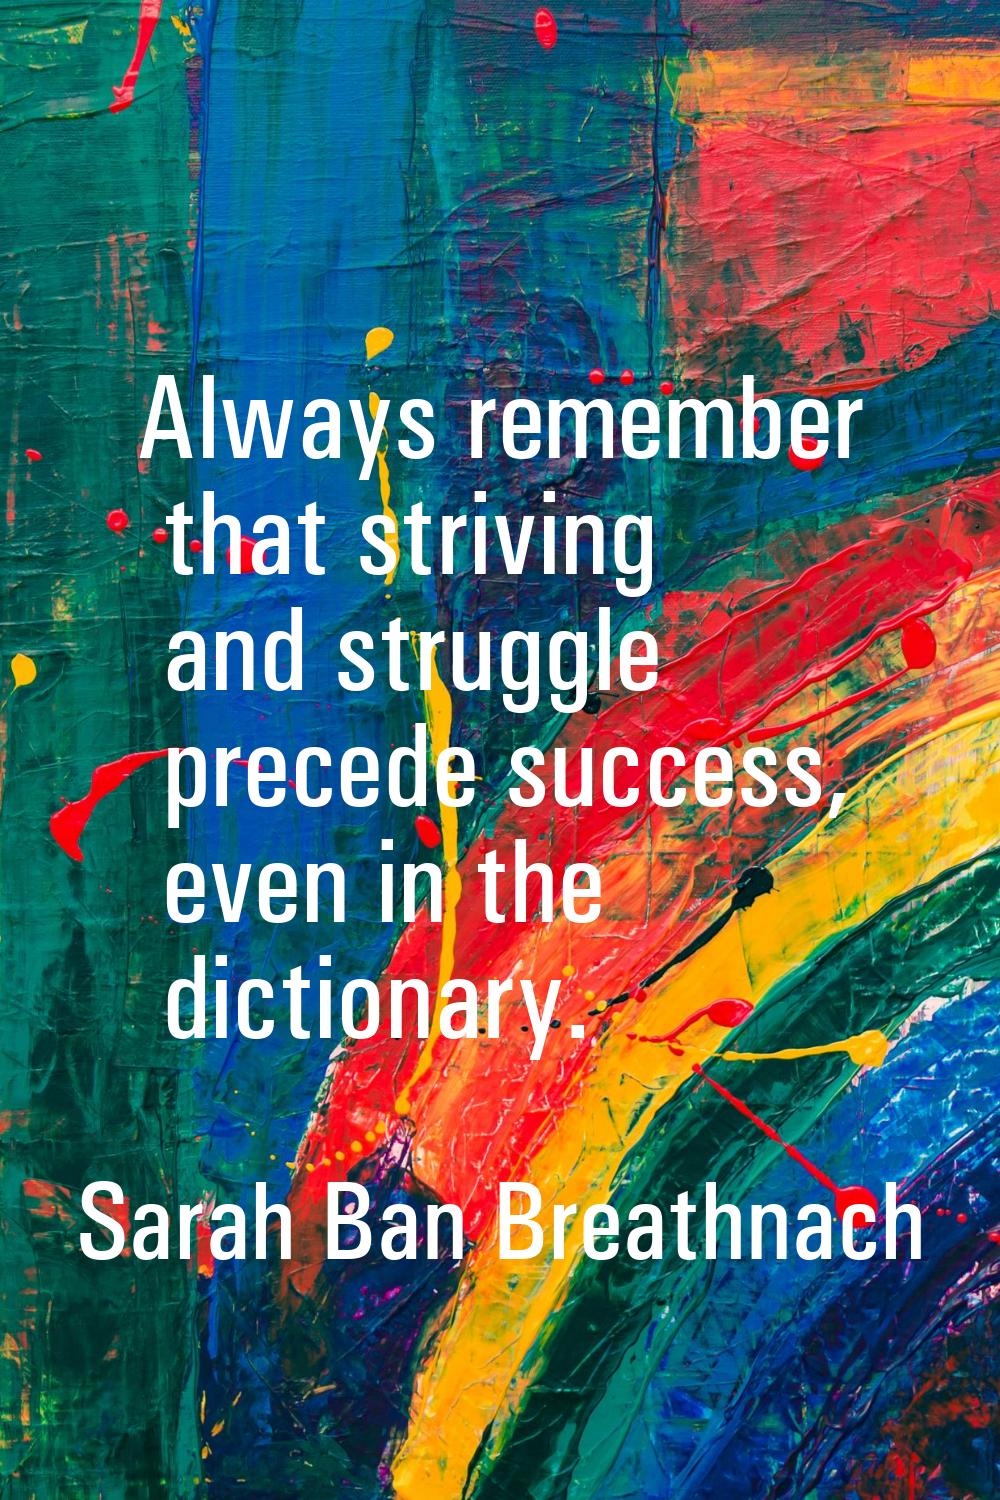 Always remember that striving and struggle precede success, even in the dictionary.